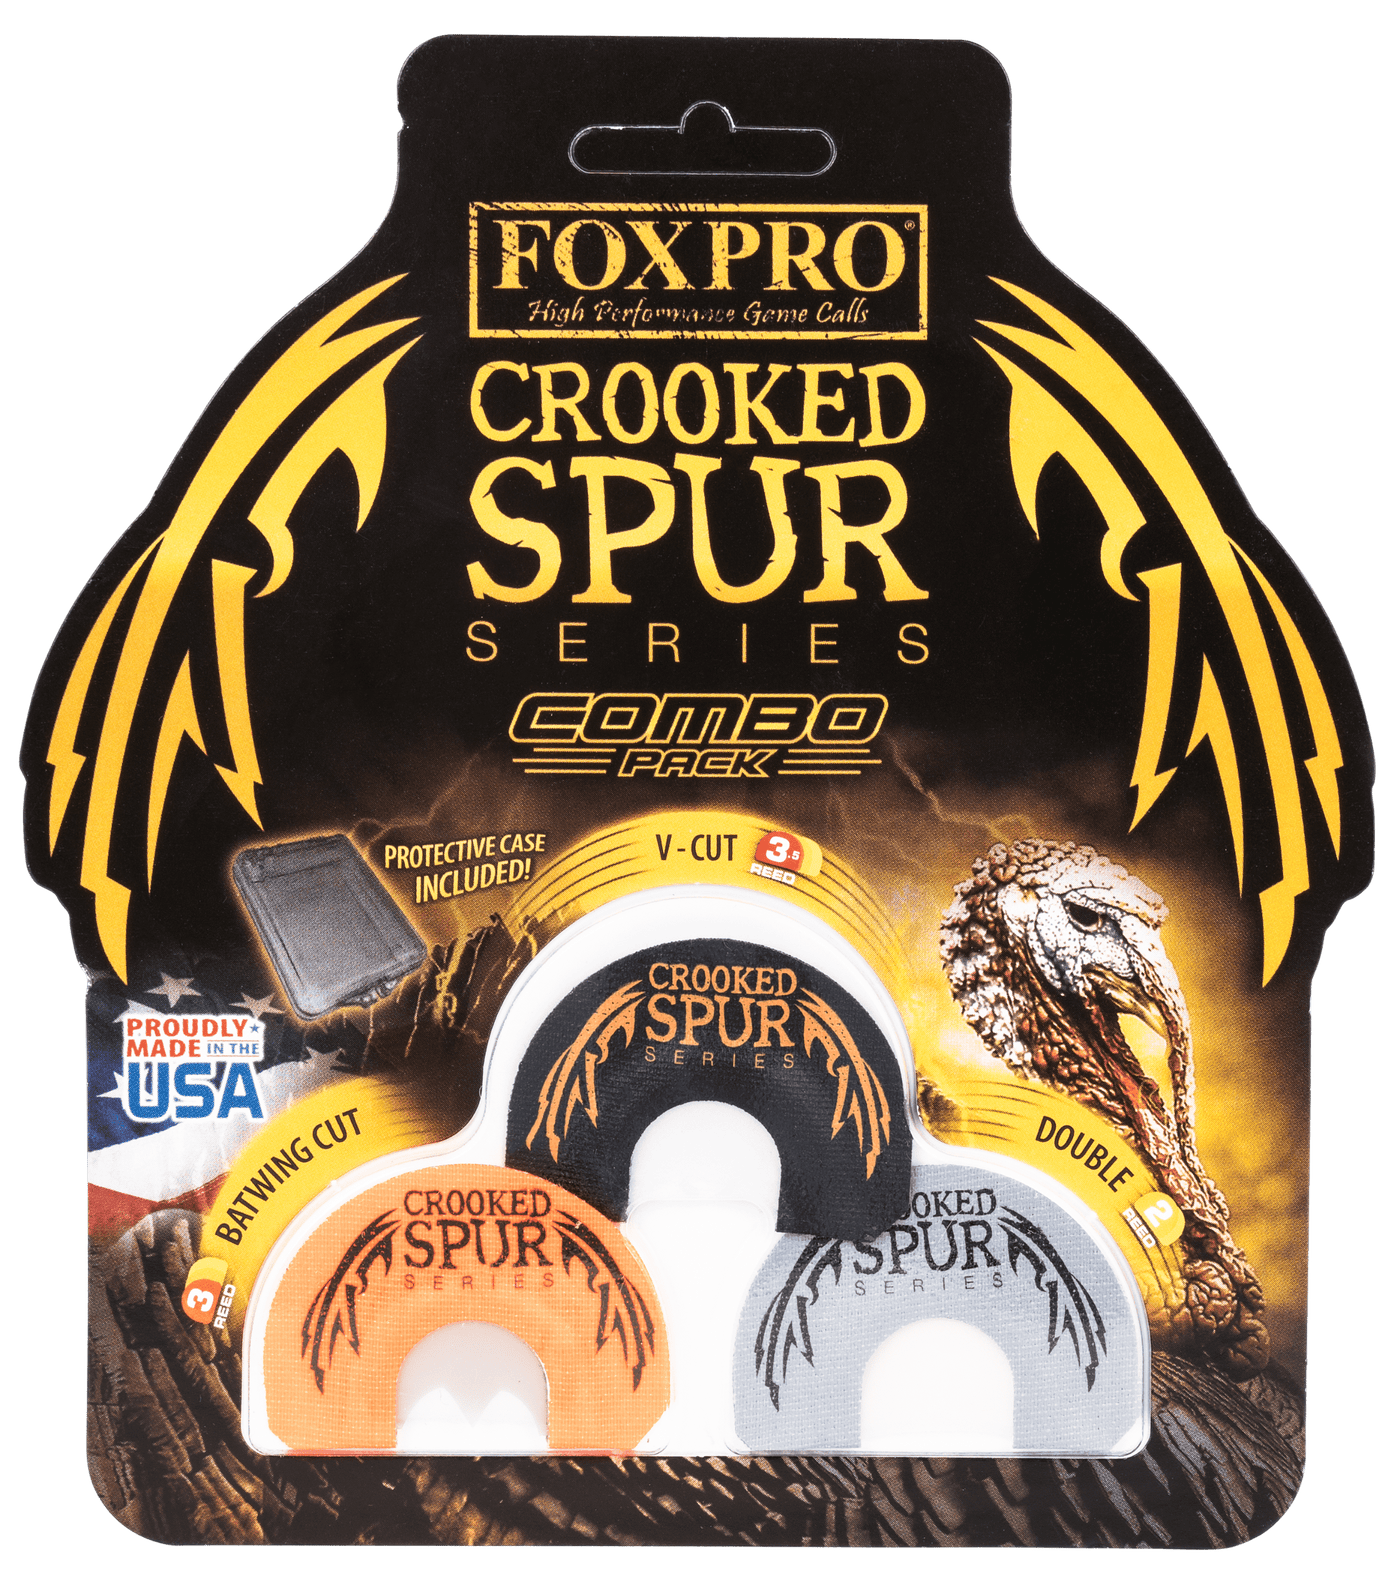 Foxpro Foxpro Crooked Spur, Foxpro Csmcombo           Crooked Spur Mth Call Cb Hunting